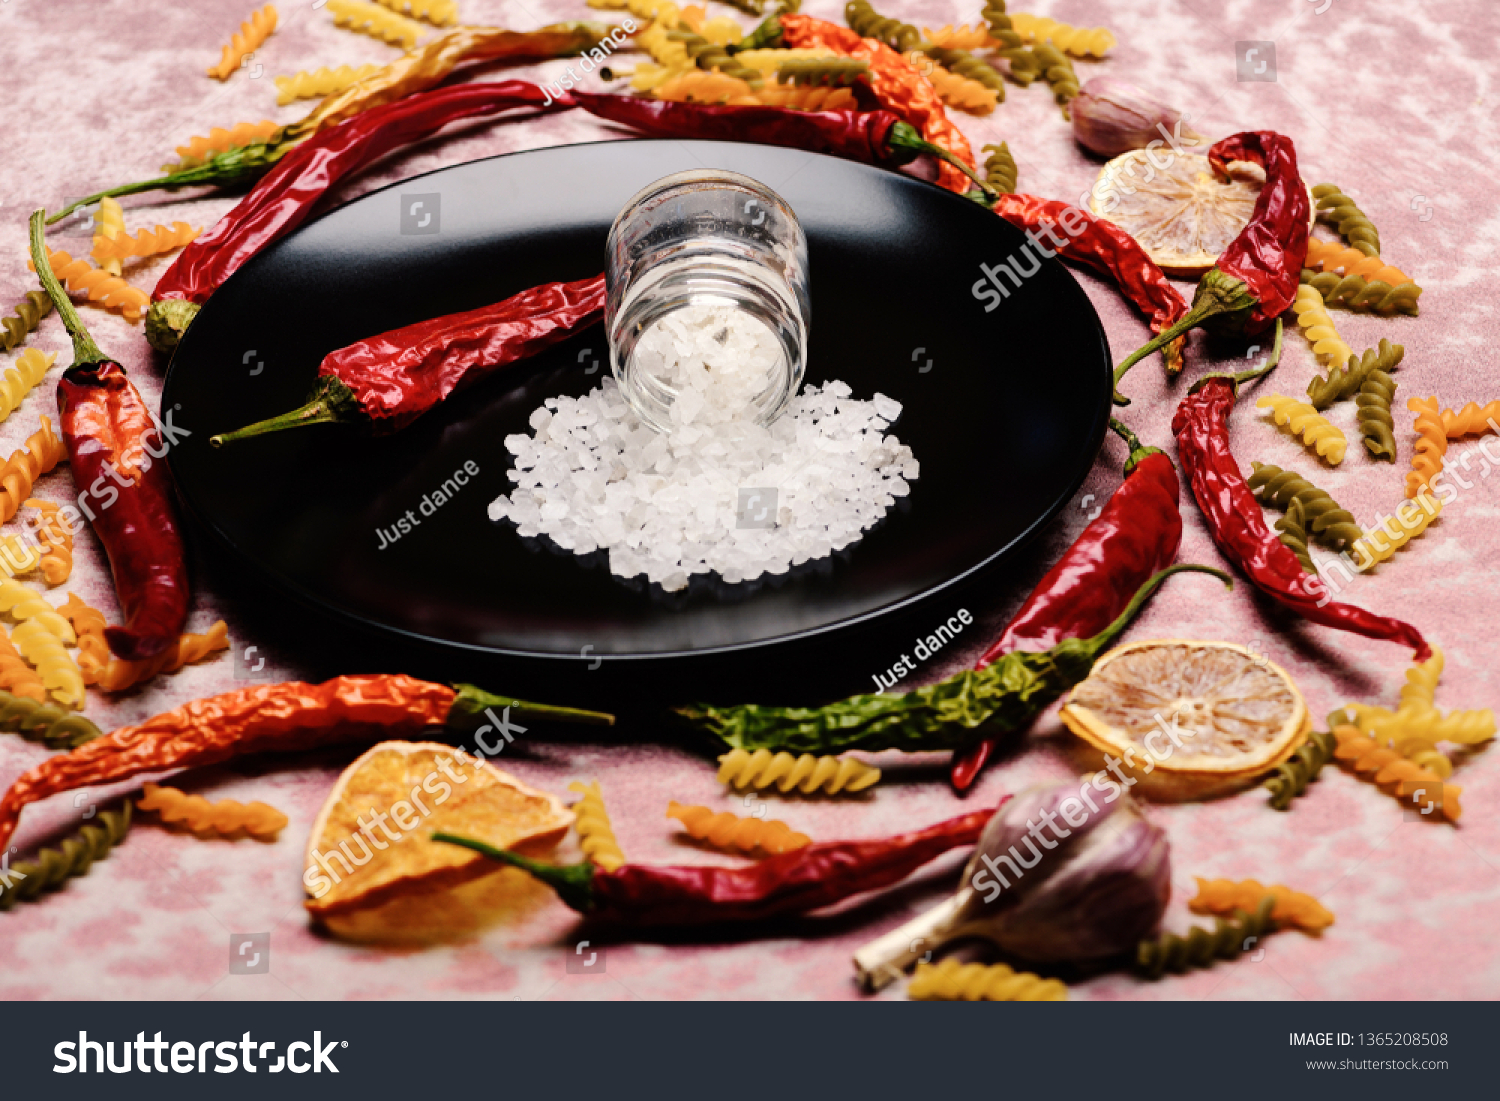 delicious colorful Italian pasta, spice in jar and chili pepper on ceramic plate, orange, garlic on pink textured background, side view #1365208508